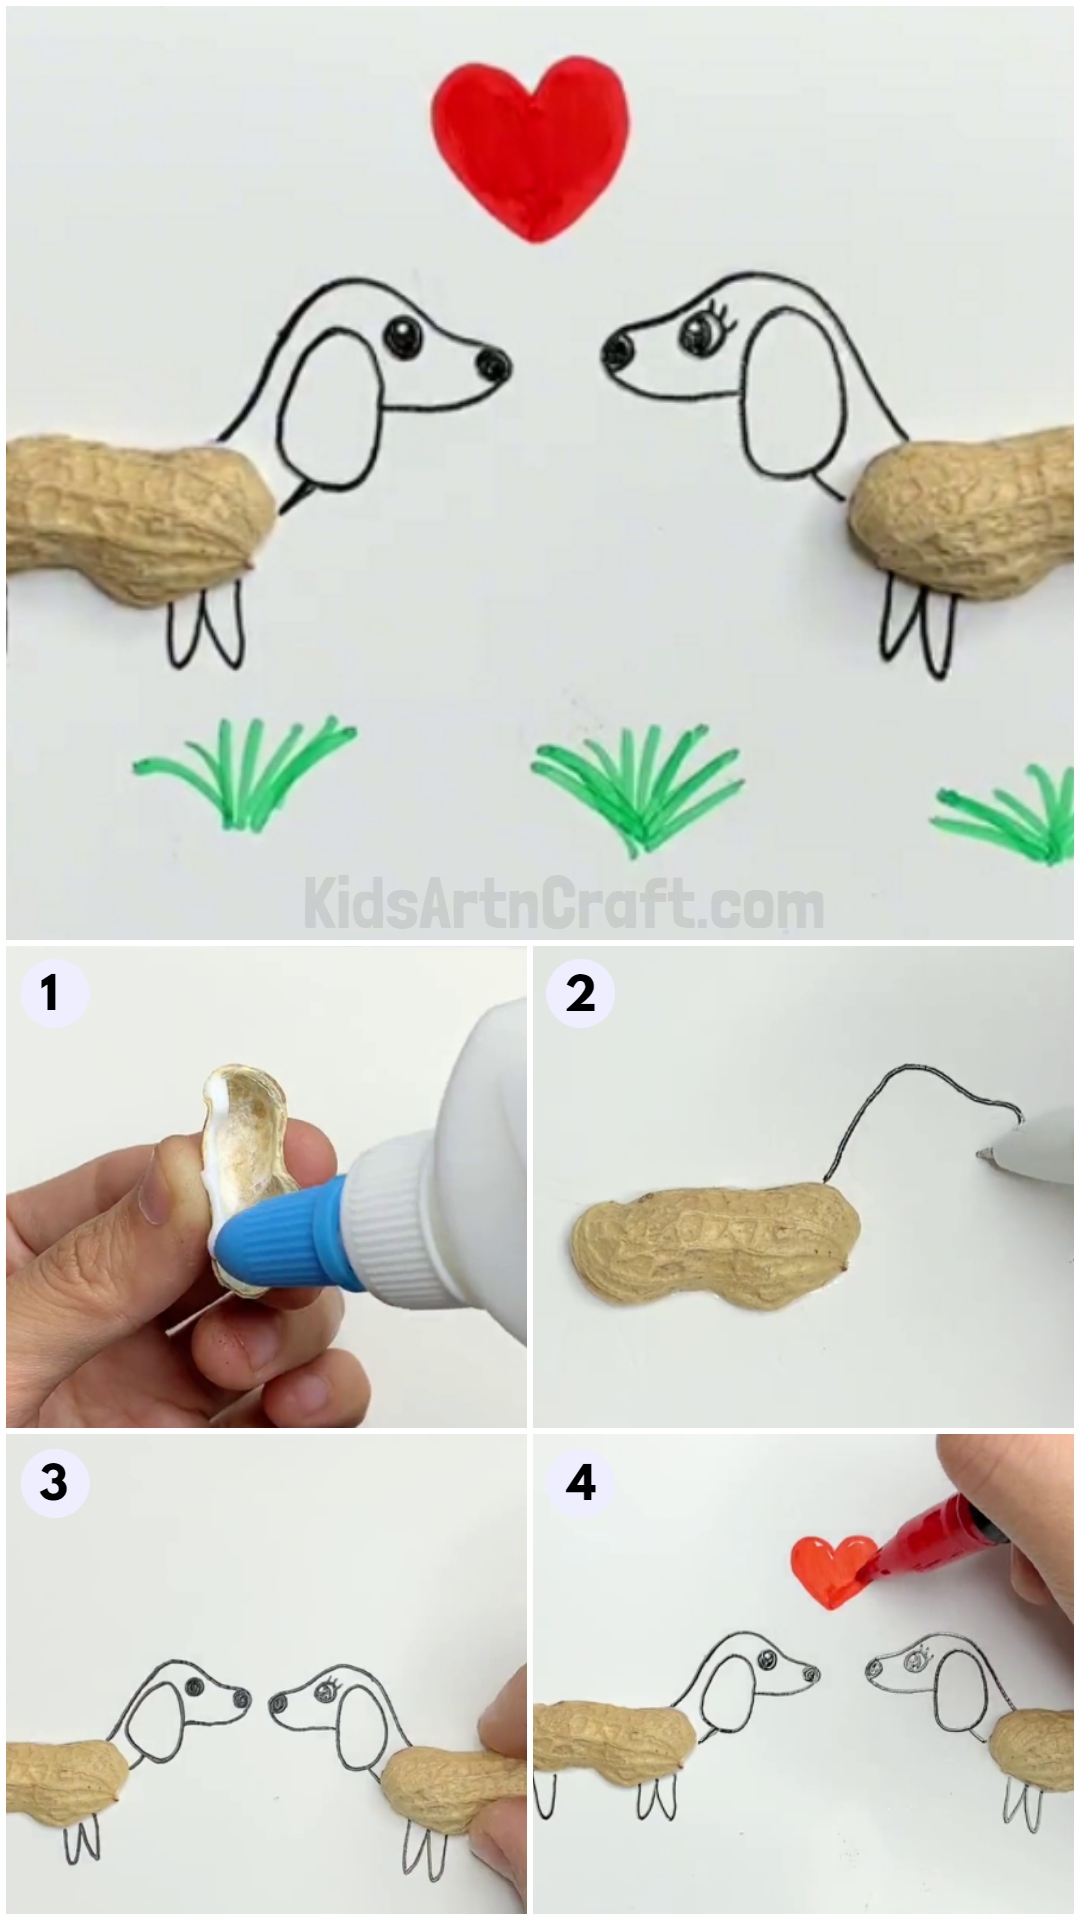 How To Make Dog From Peanut Shell Easy Craft Tutorial